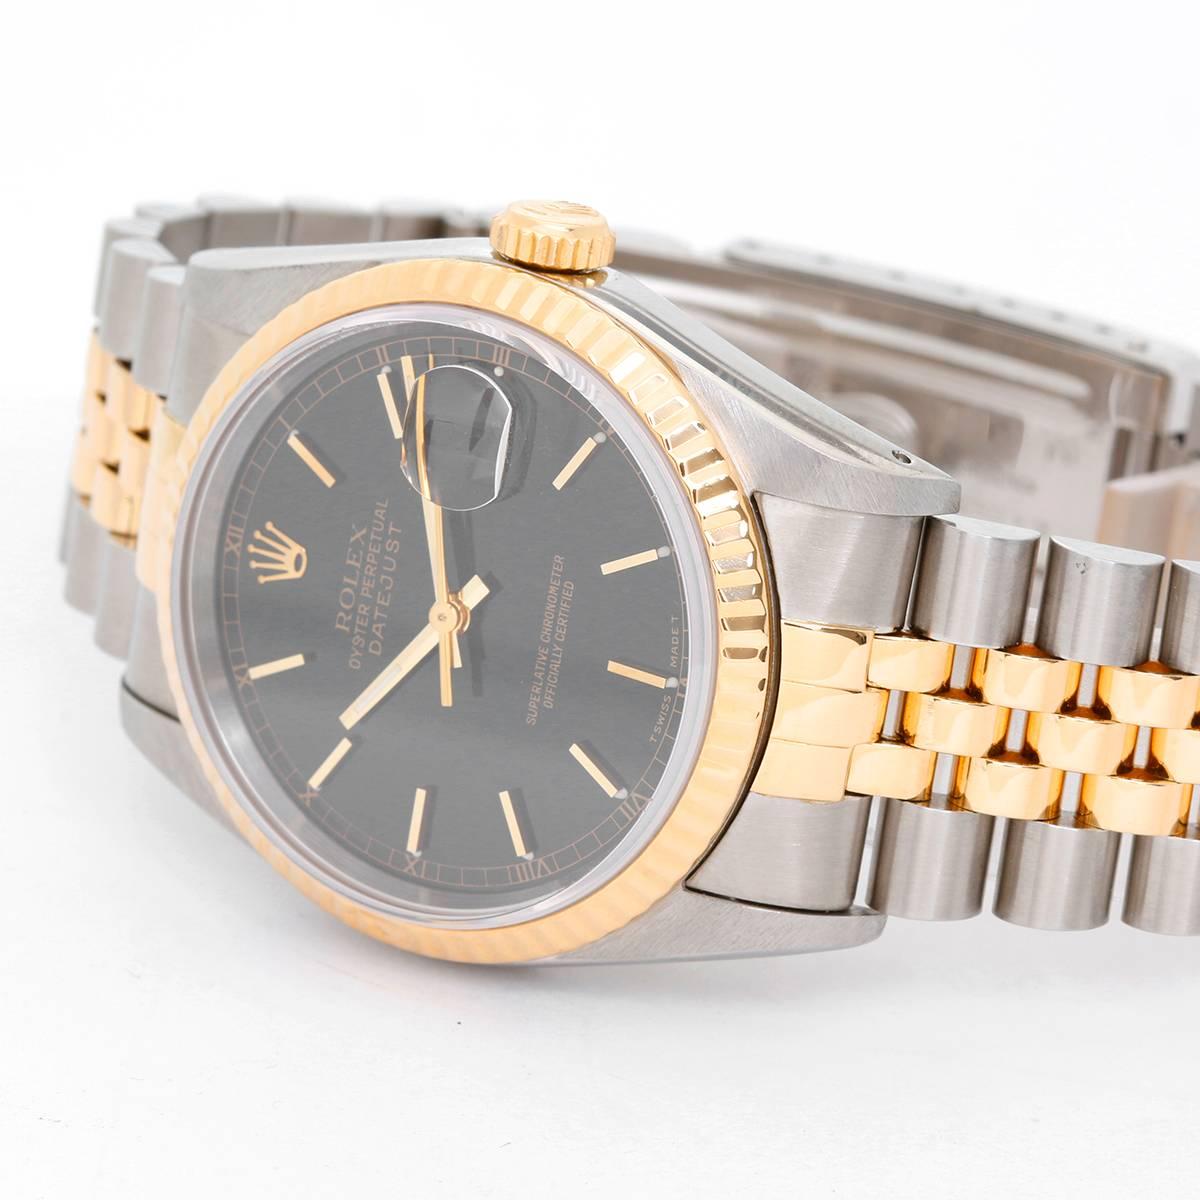 Rolex Datejust Men's 2-Tone Watch 16233 -  Automatic winding, 31 jewels, Quickset, sapphire crystal.  Stainless steel case with18k yellow gold  fluted bezel  (36mm diameter). Black dial with stick markers. Stainless steel and 18k yellow gold Jubilee